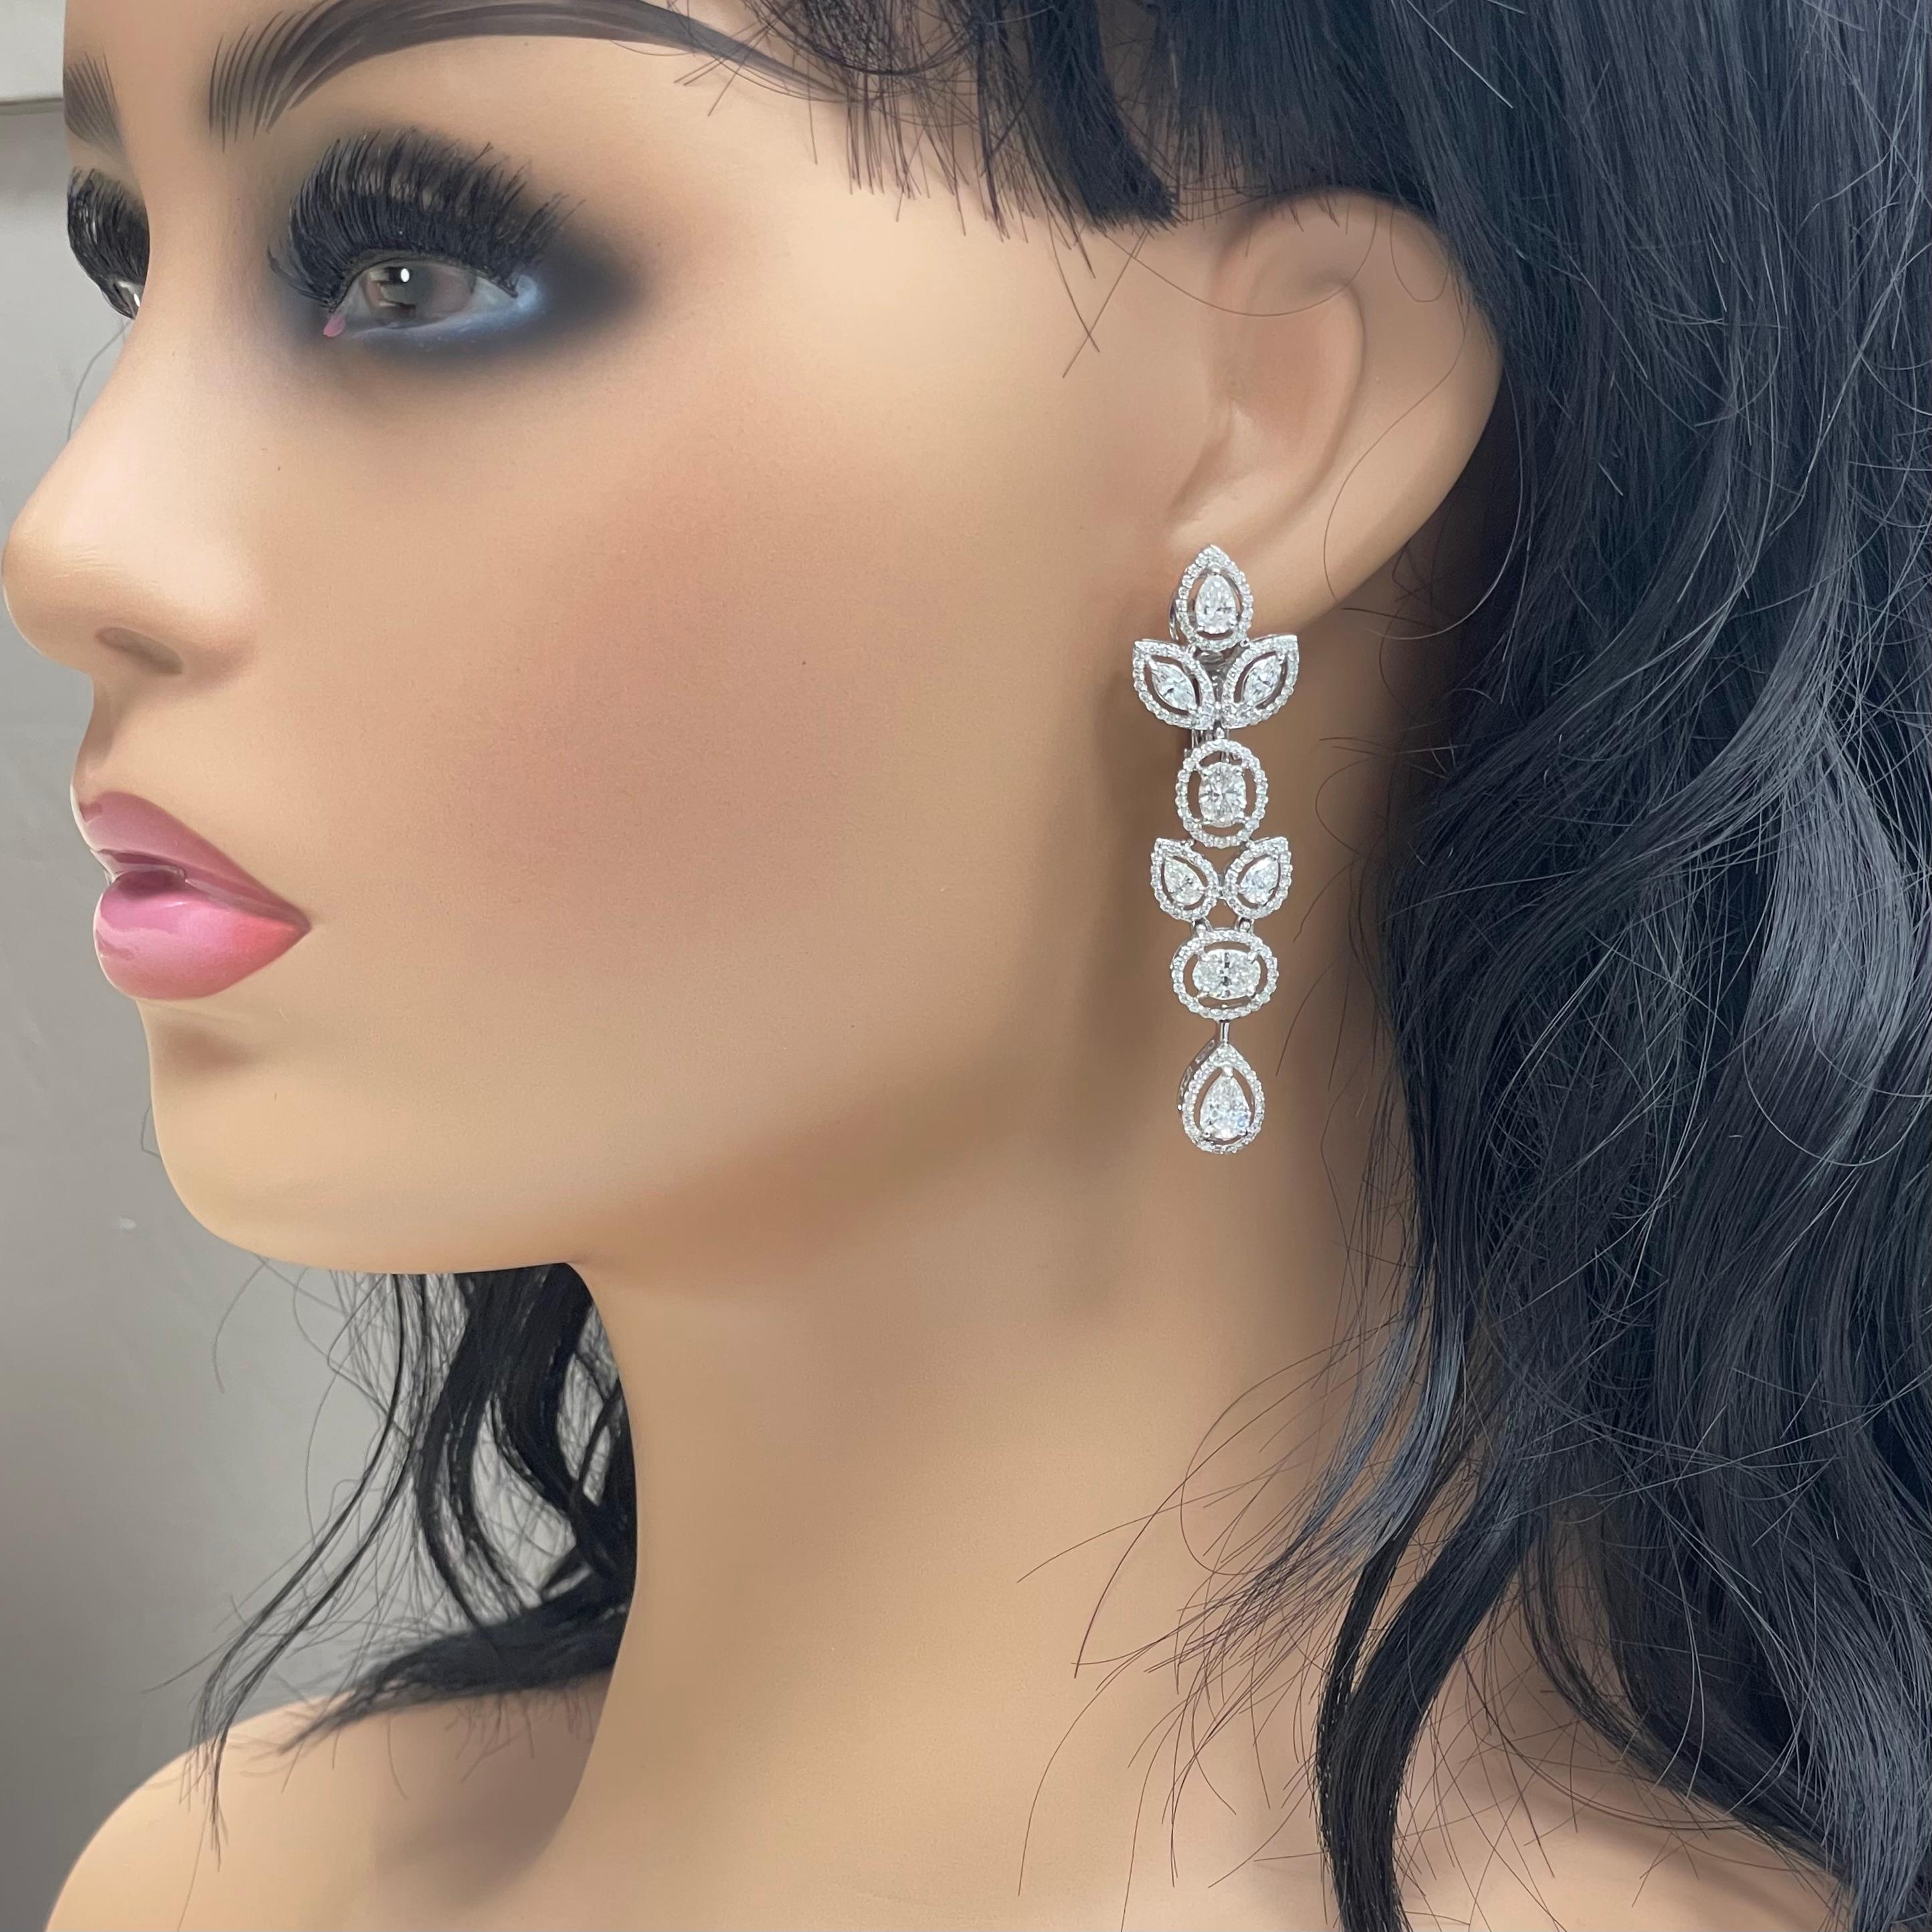 The Tara Earrings feature a elegant timeless design that highlights each diamond and impresses with its simple yet stated style. They are bold and attention grasping.

Diamonds Shapes: Pear Shape, Oval & Marquise
Total Diamonds Weight: 6.59